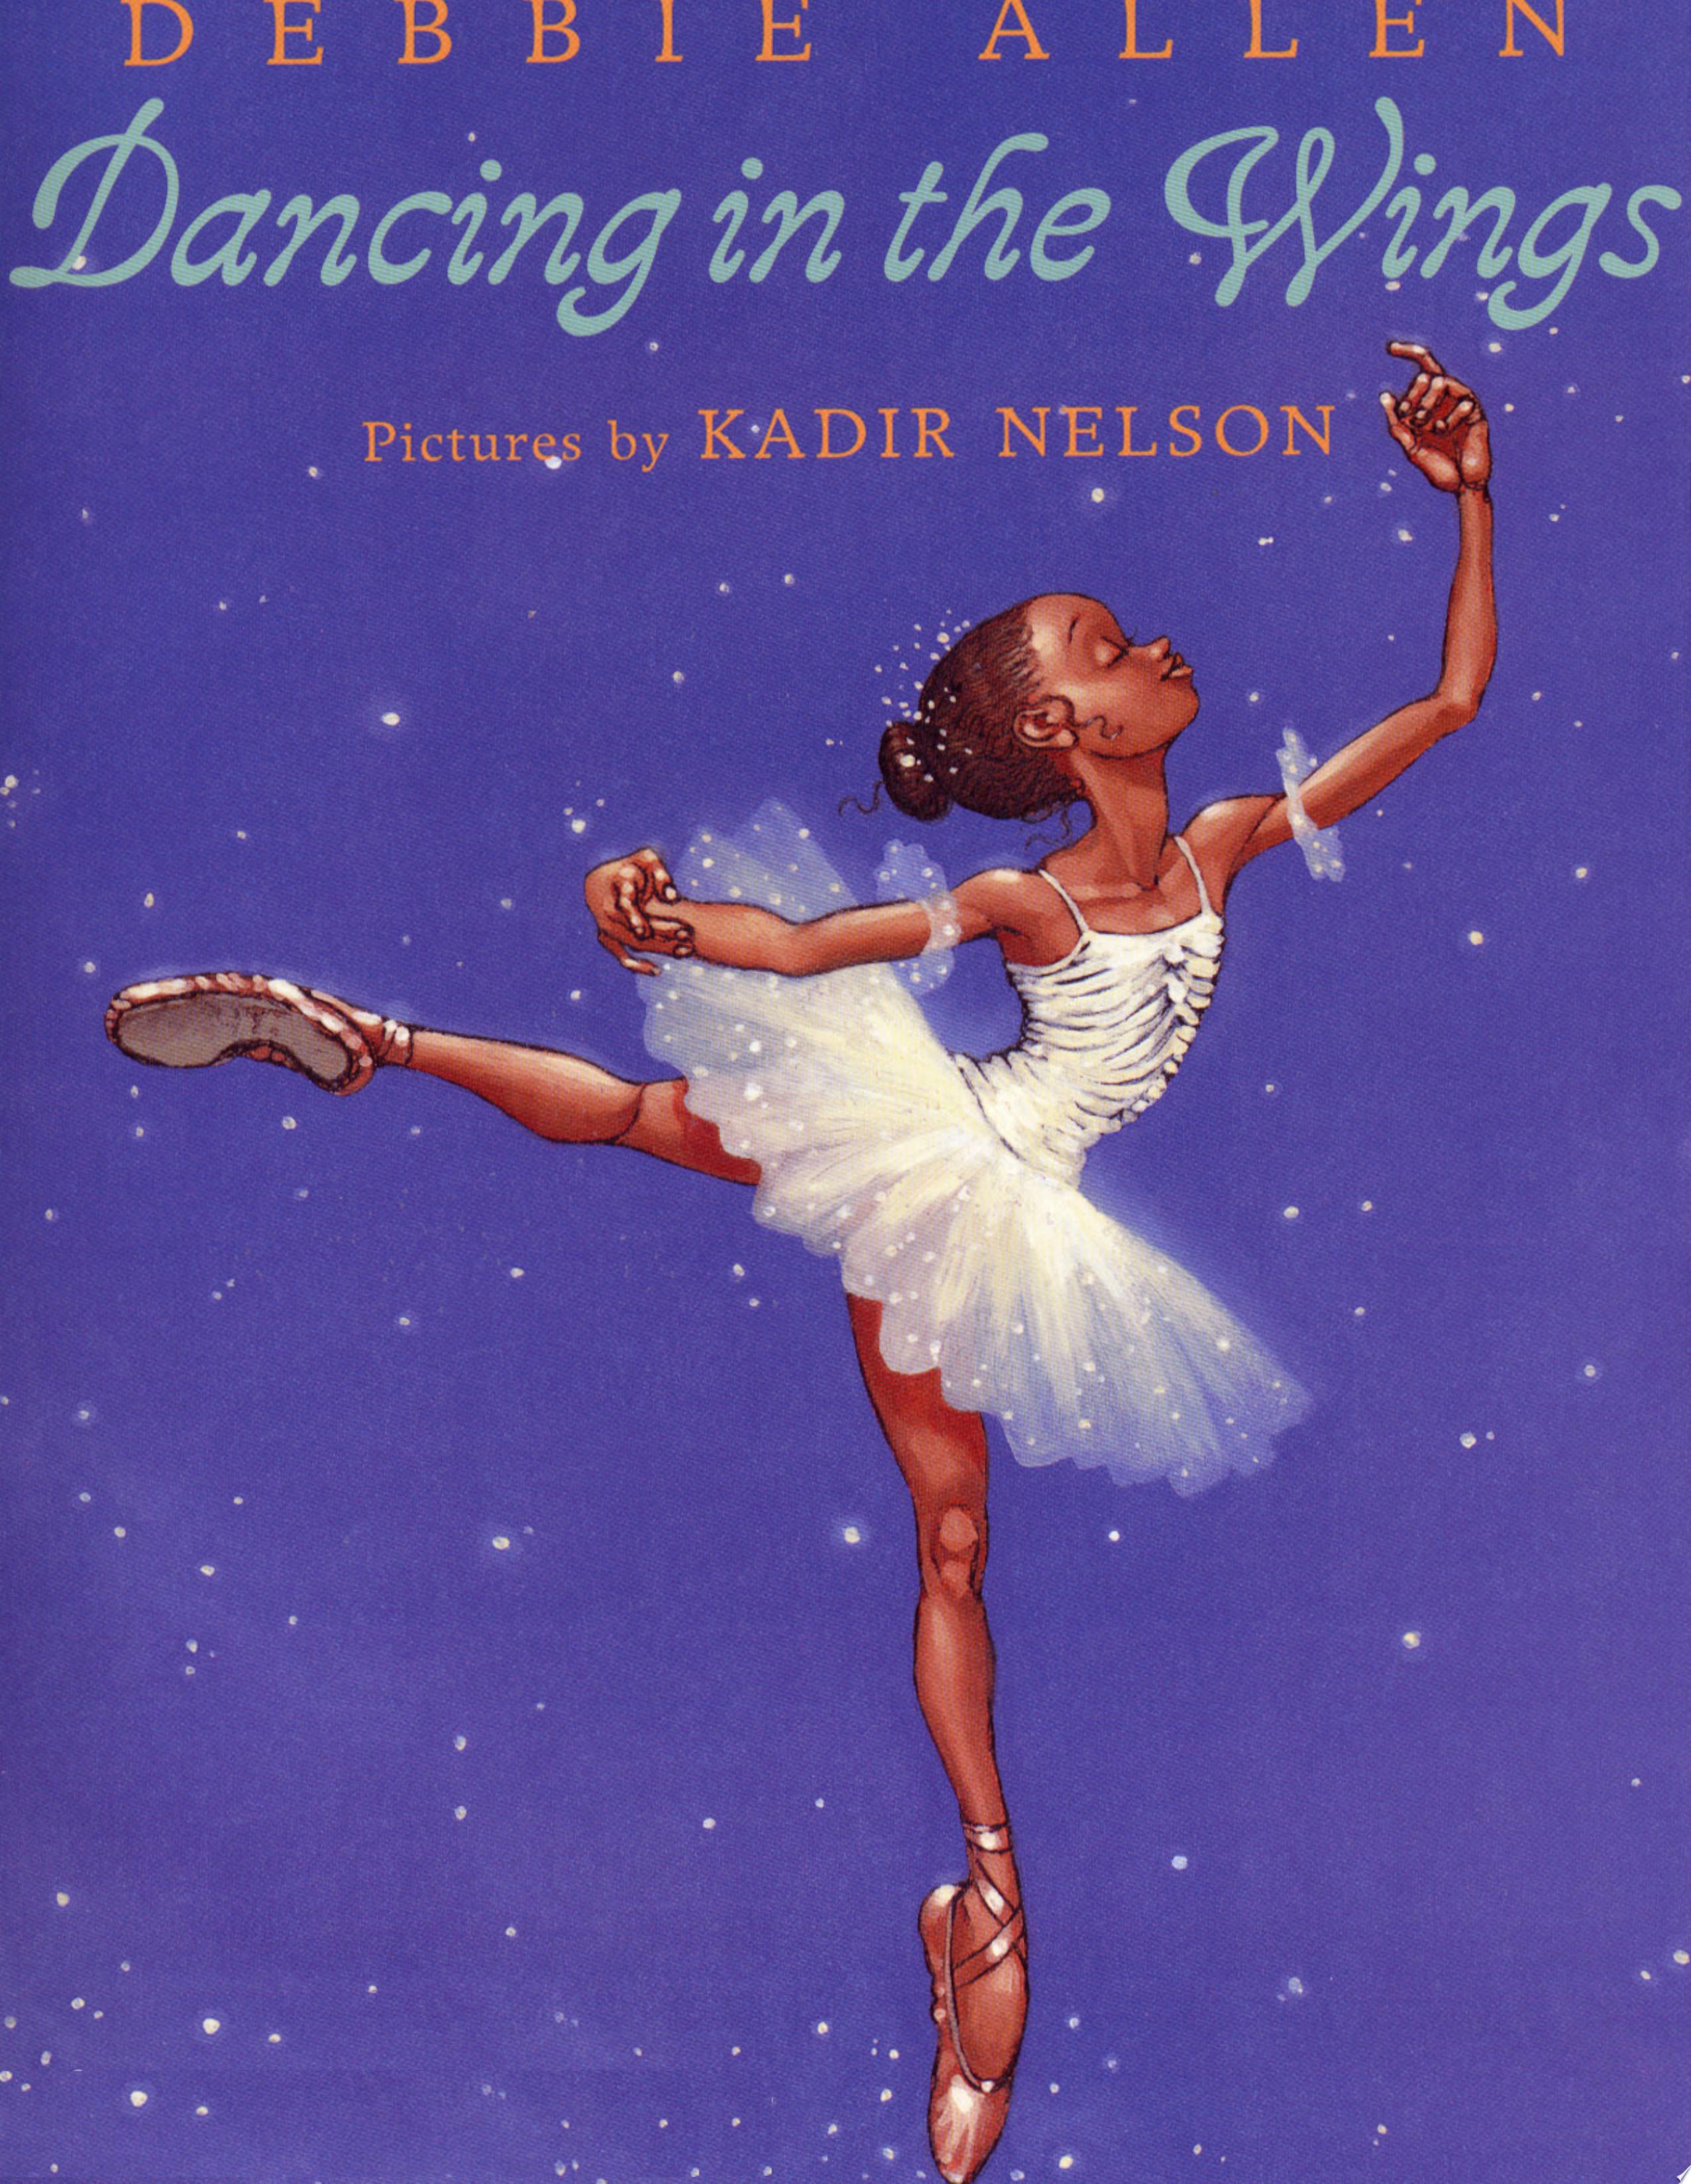 Image for "Dancing in the Wings"